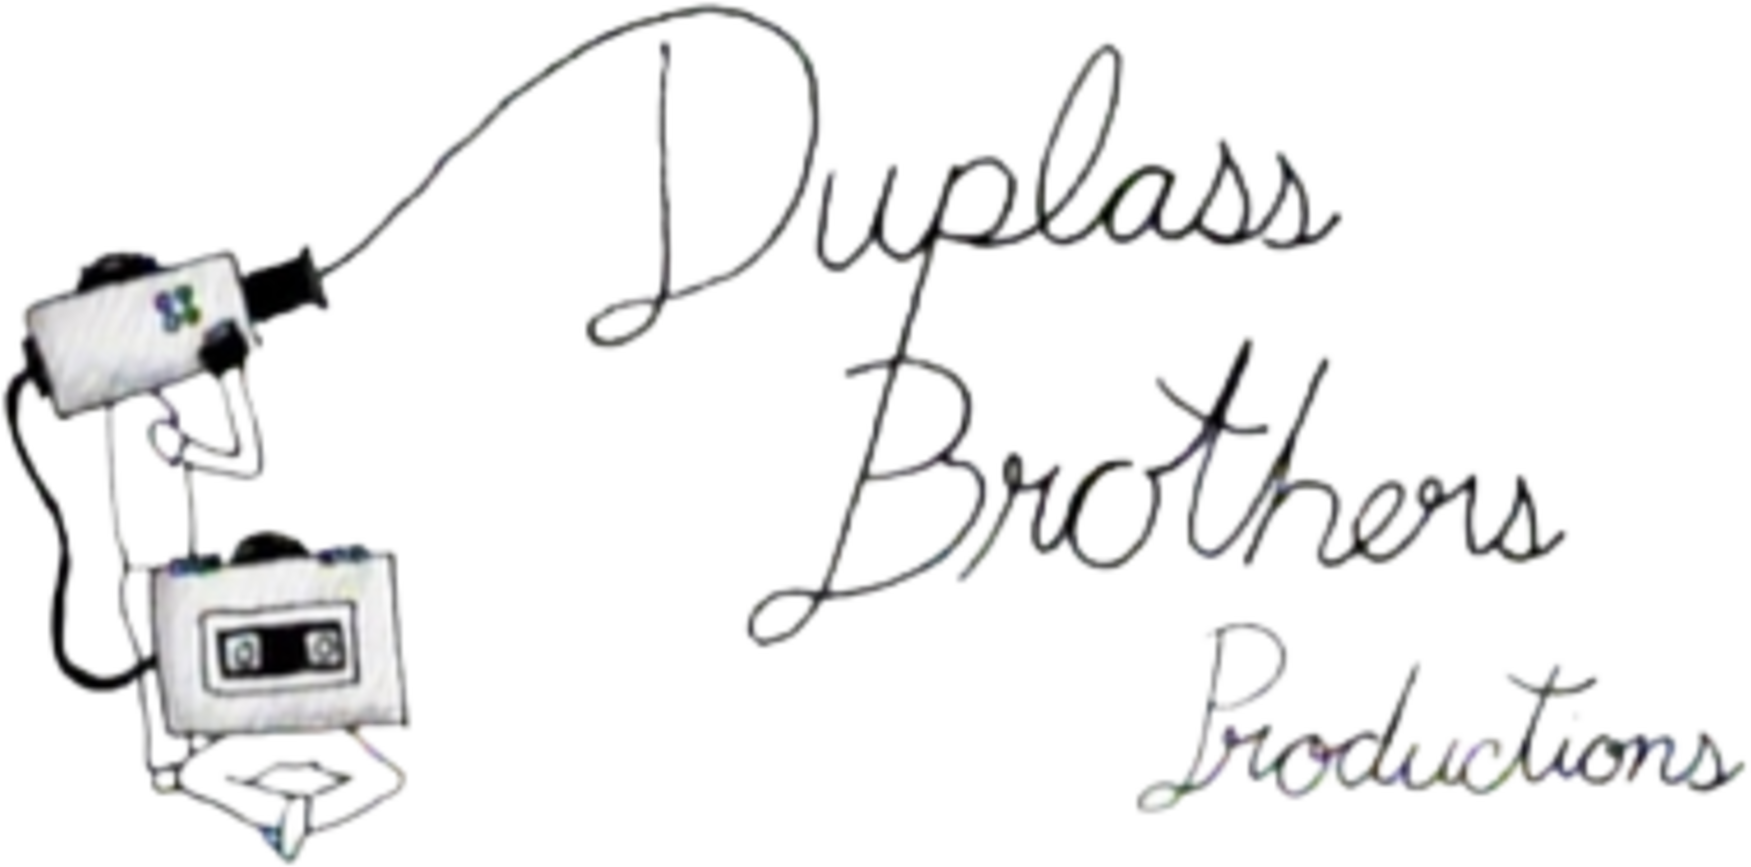 Duplass Brothers Productions - company